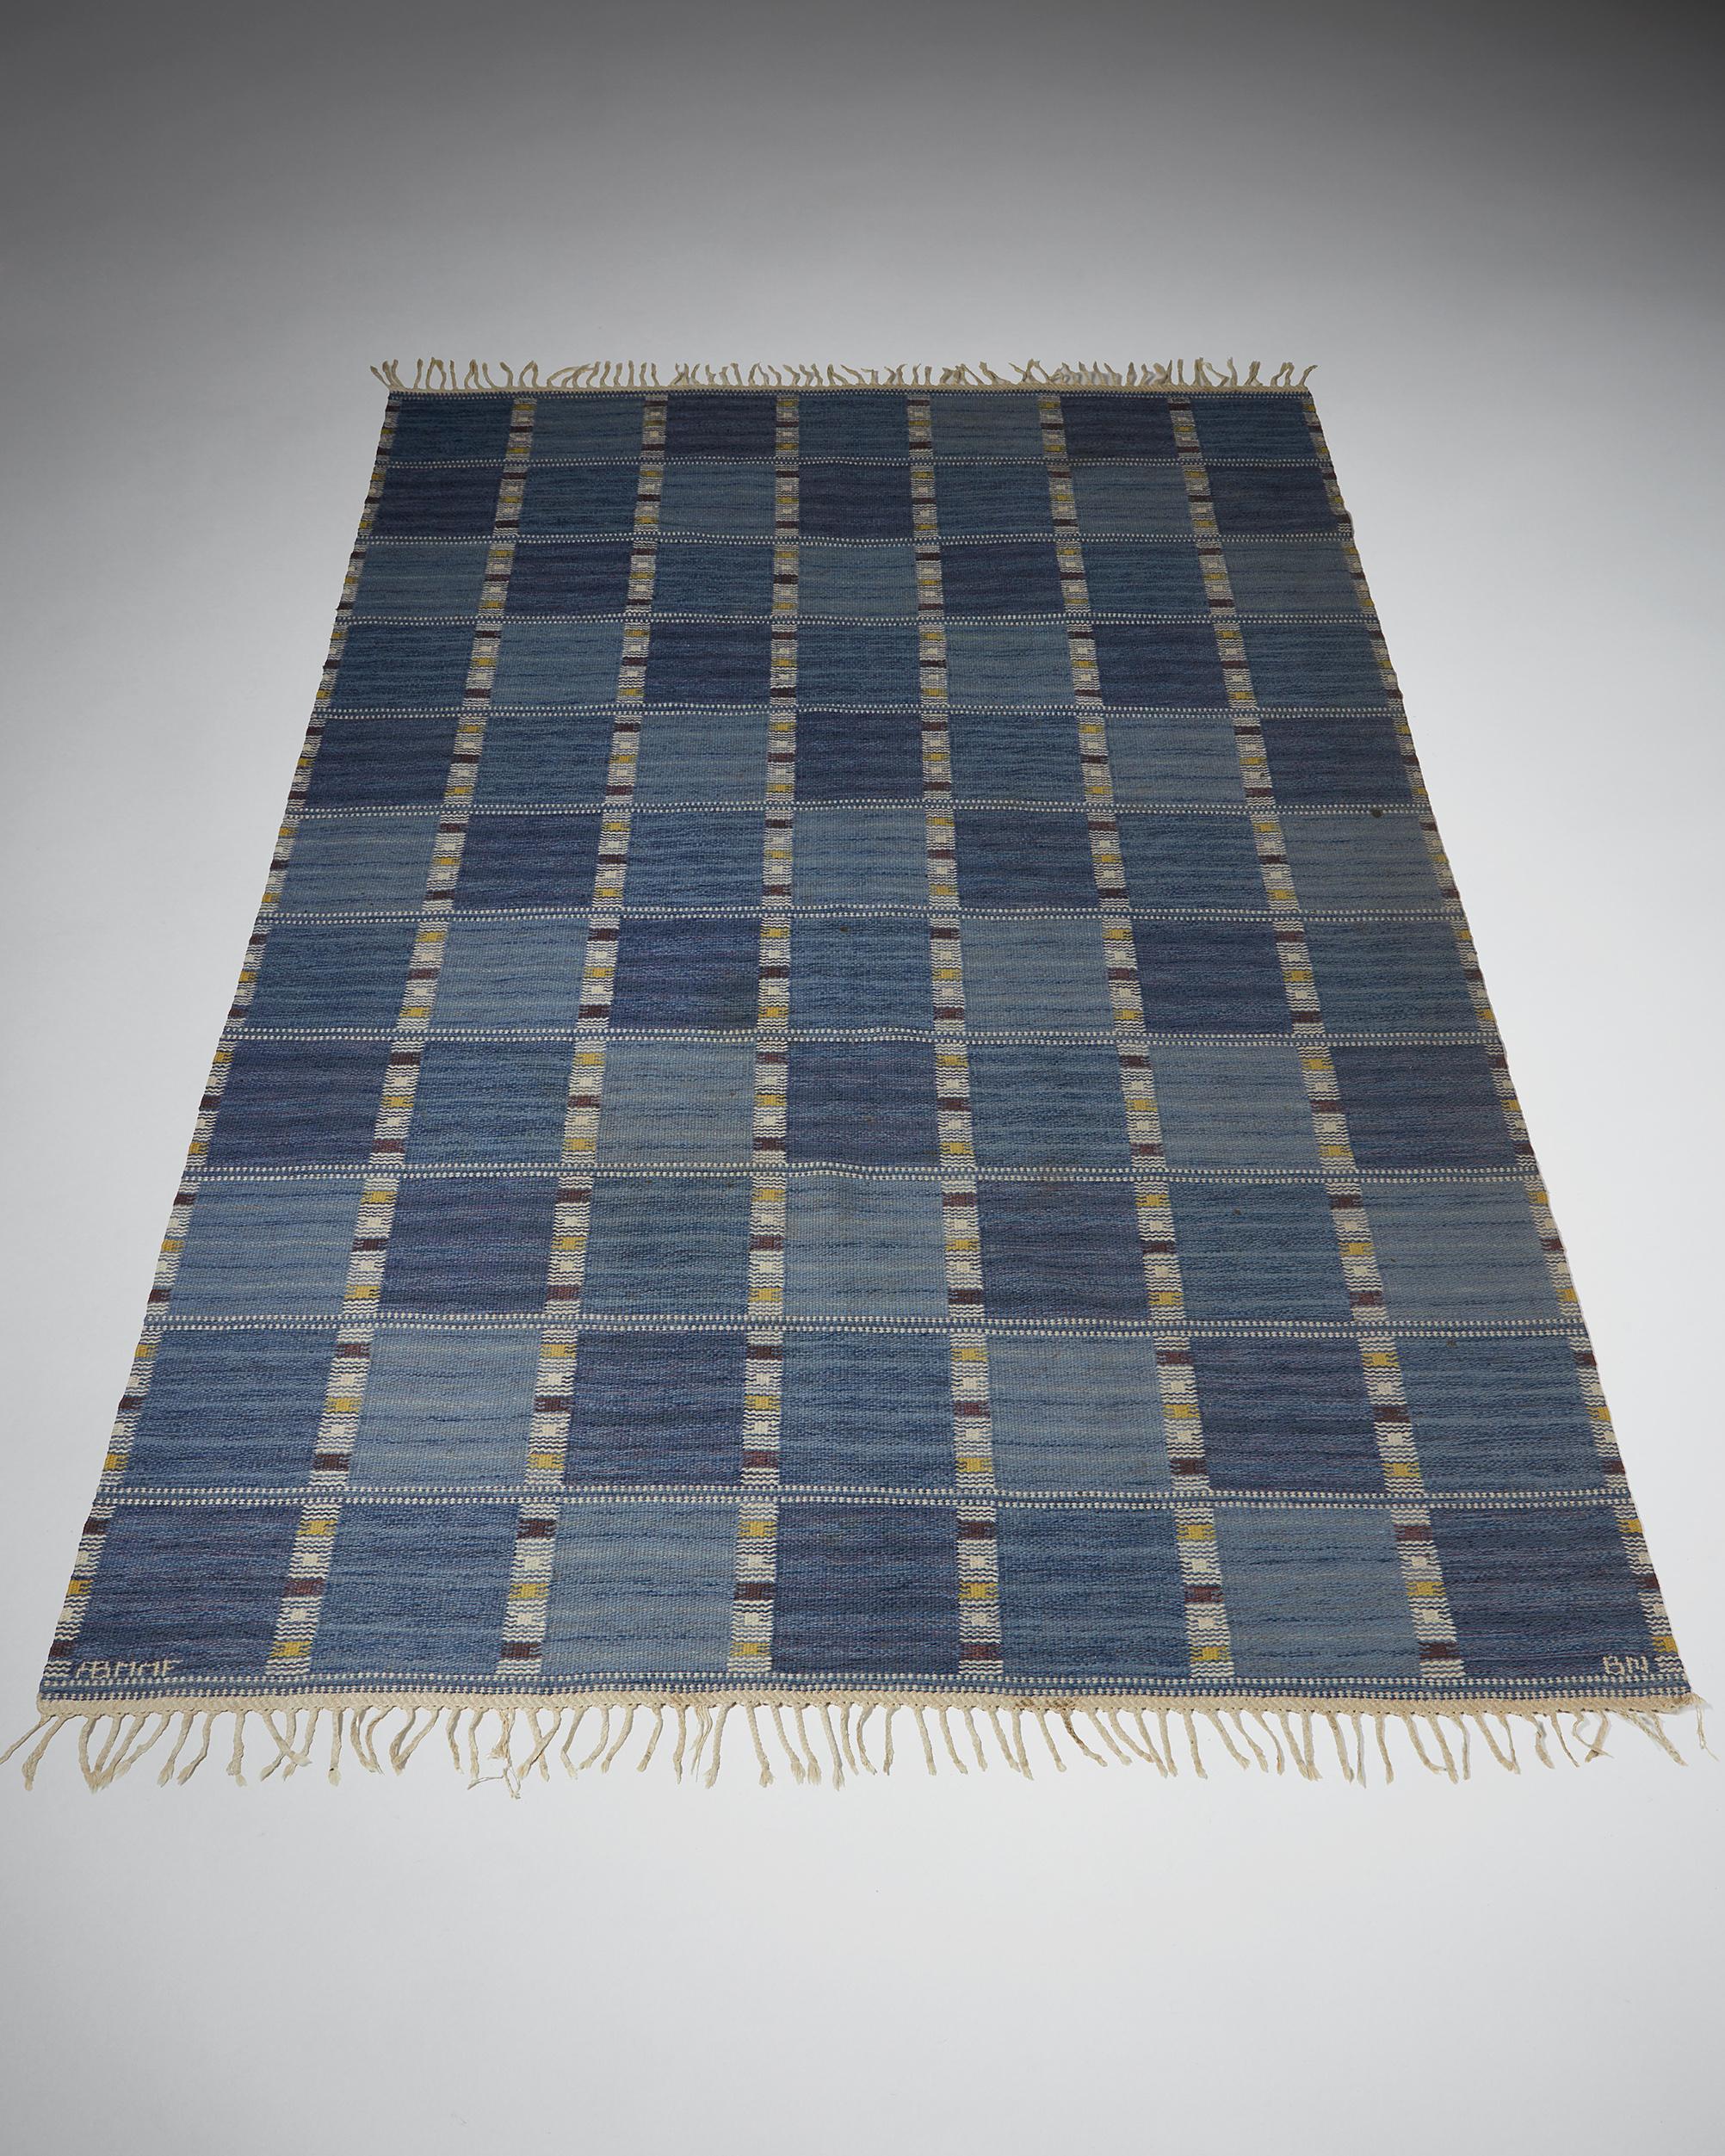 Mid-Century Modern Rug Designed by Barbro Nilsson for MMF AB, Sweden, 1952